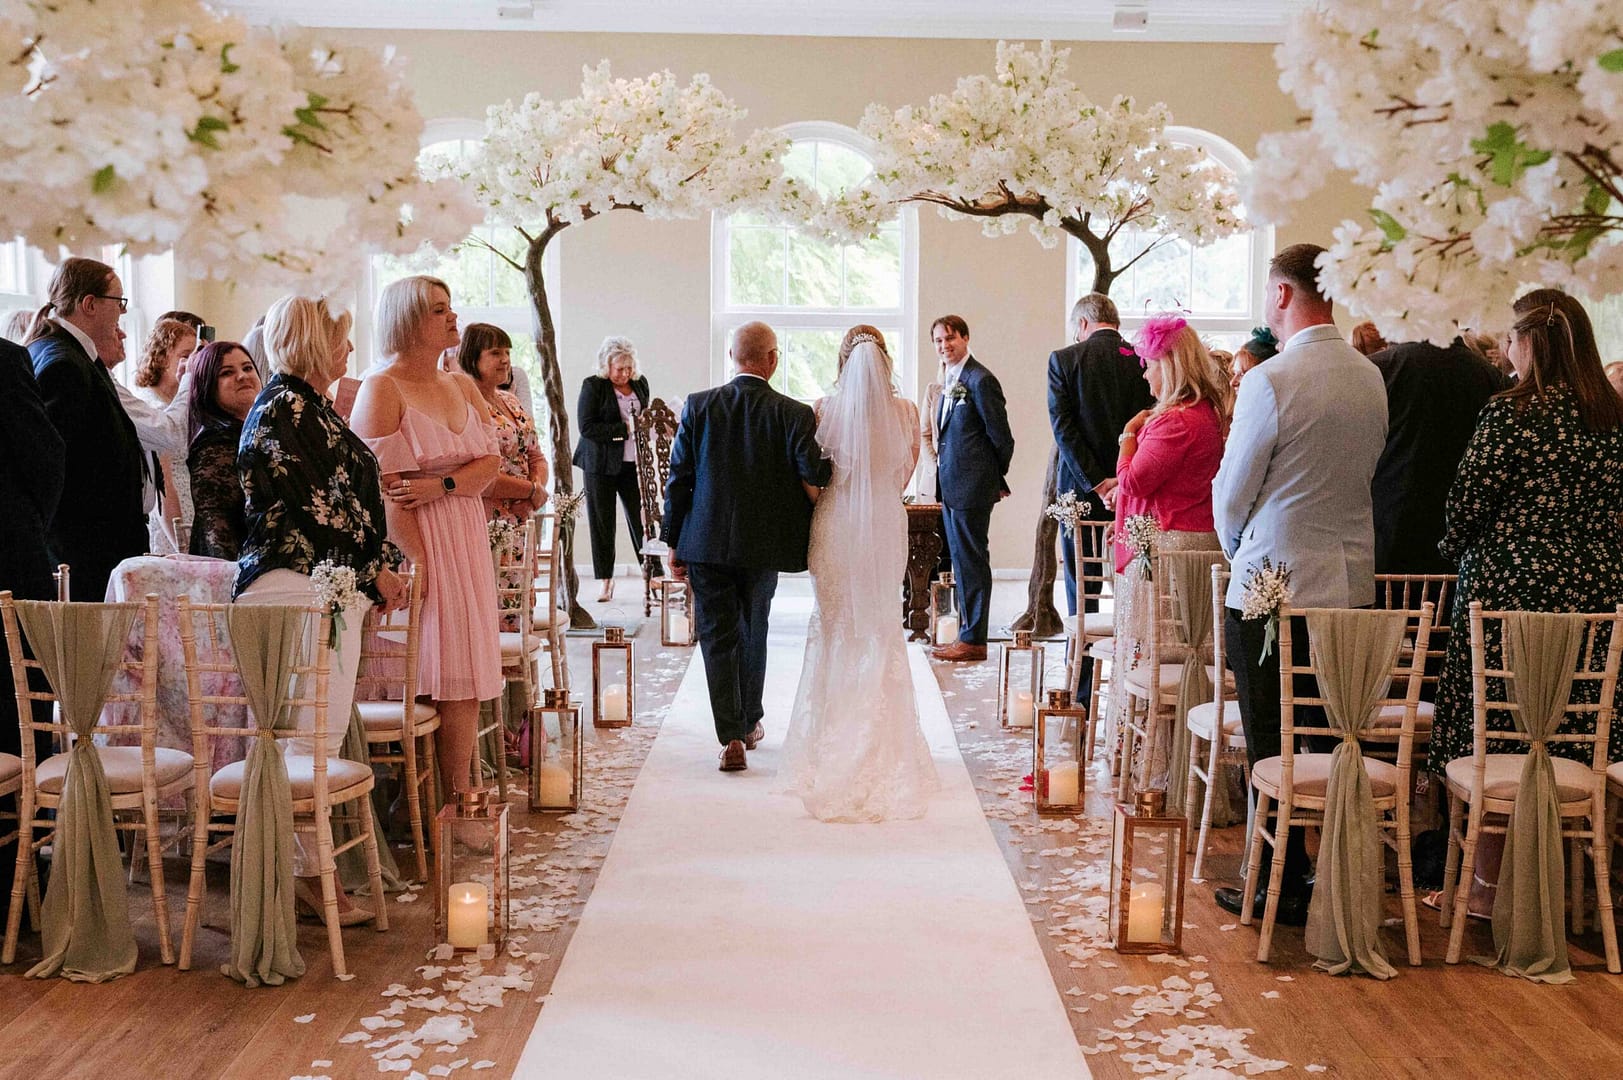 Catherine Brooks Photography - A wedding ceremony taking place in a room filled with whit blossom trees